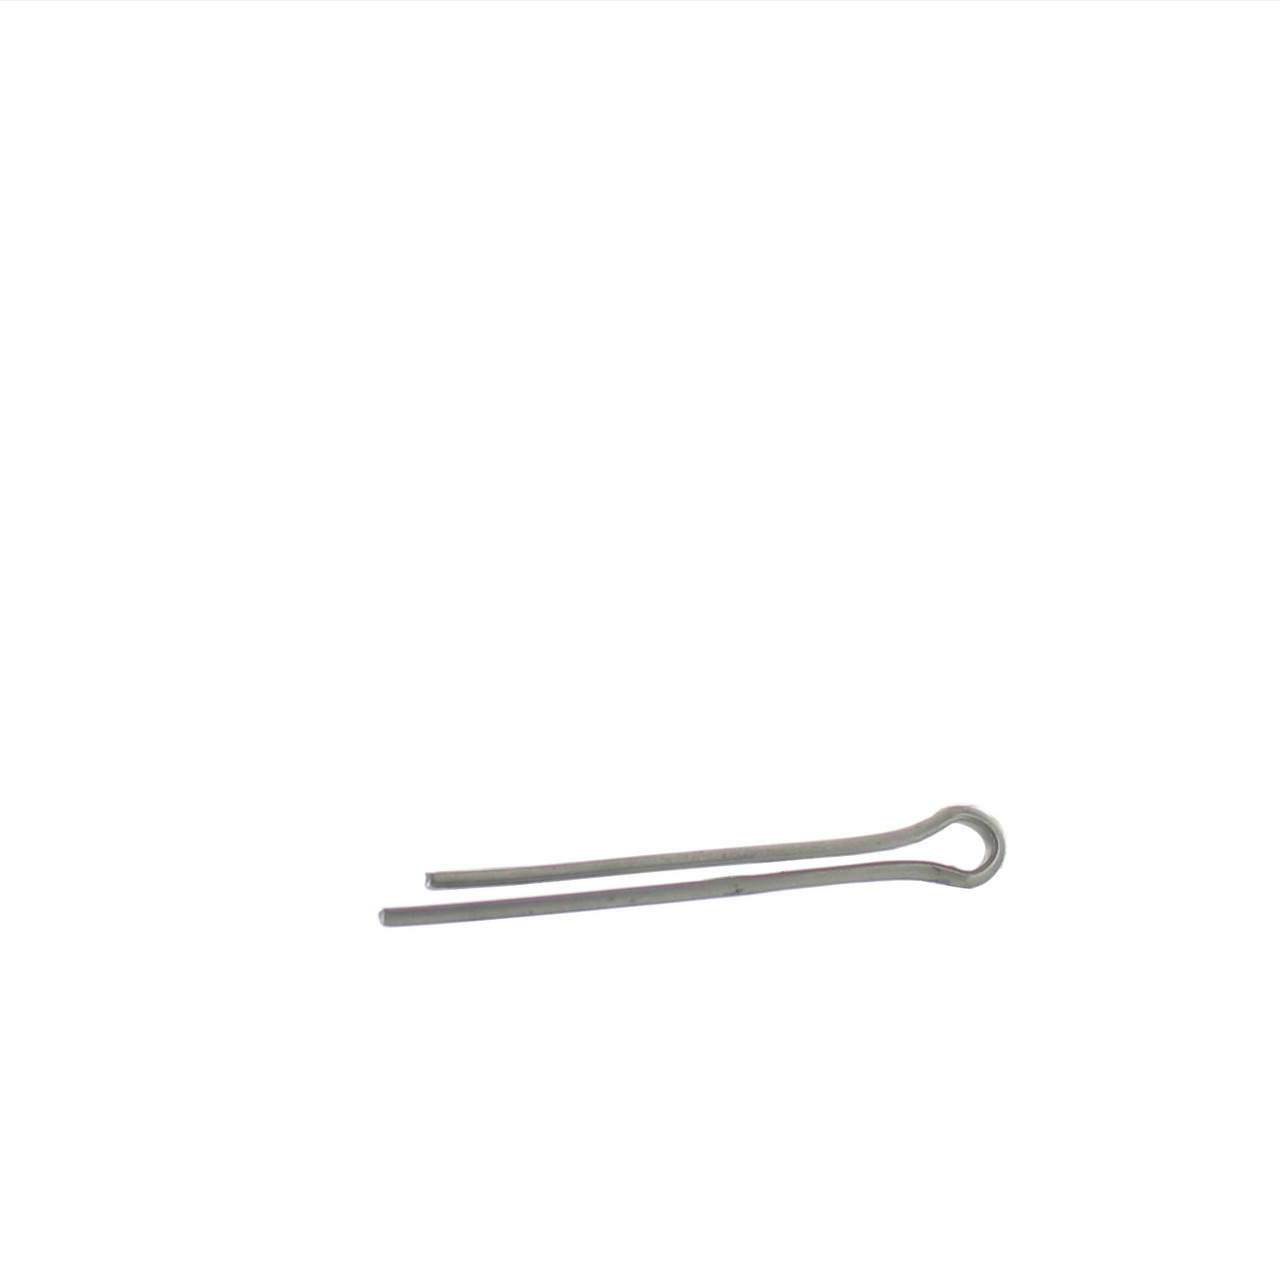 S&J Products New  Outboard Replacement Prop Nut Washer & Cotter Pin, 03020365